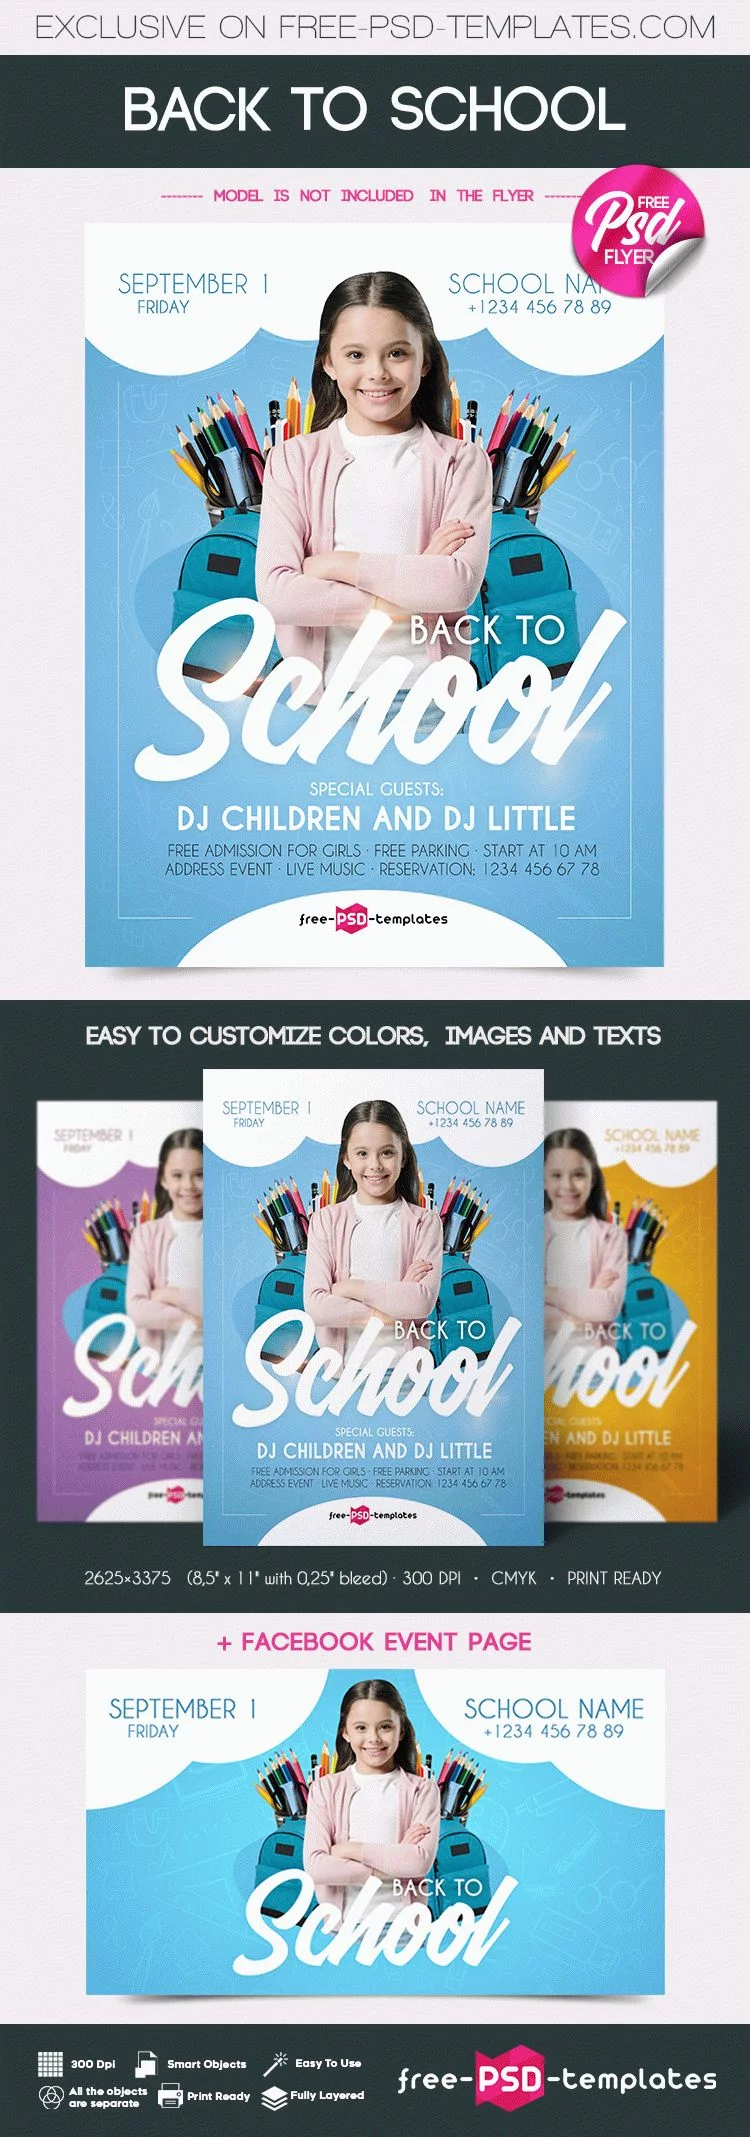 Free Back To School Flyer in PSD